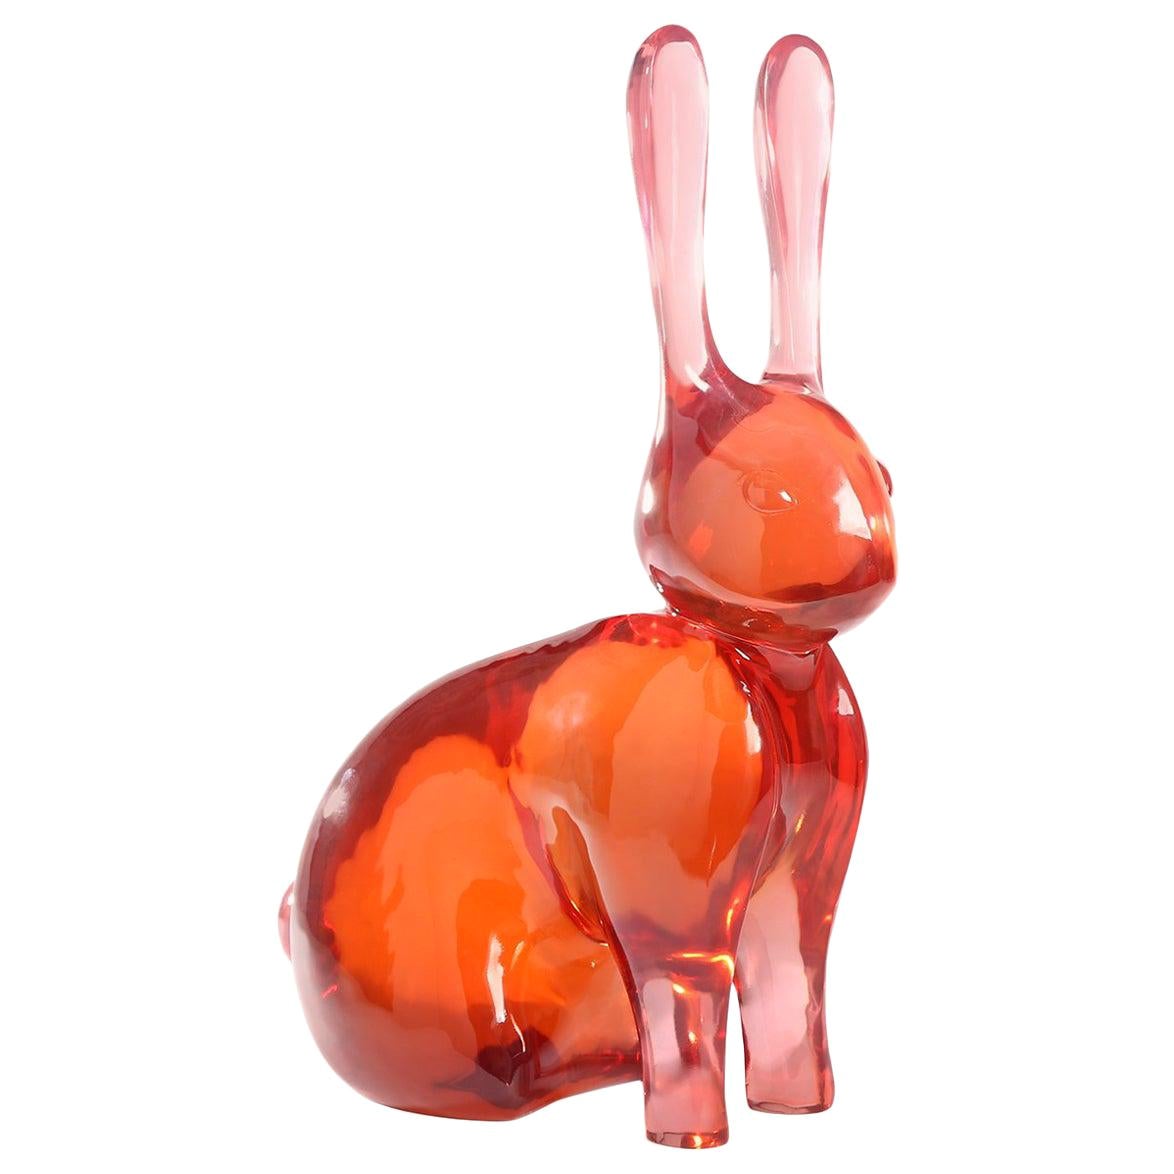 Giant Rabbit Sculpture in Red Lucite